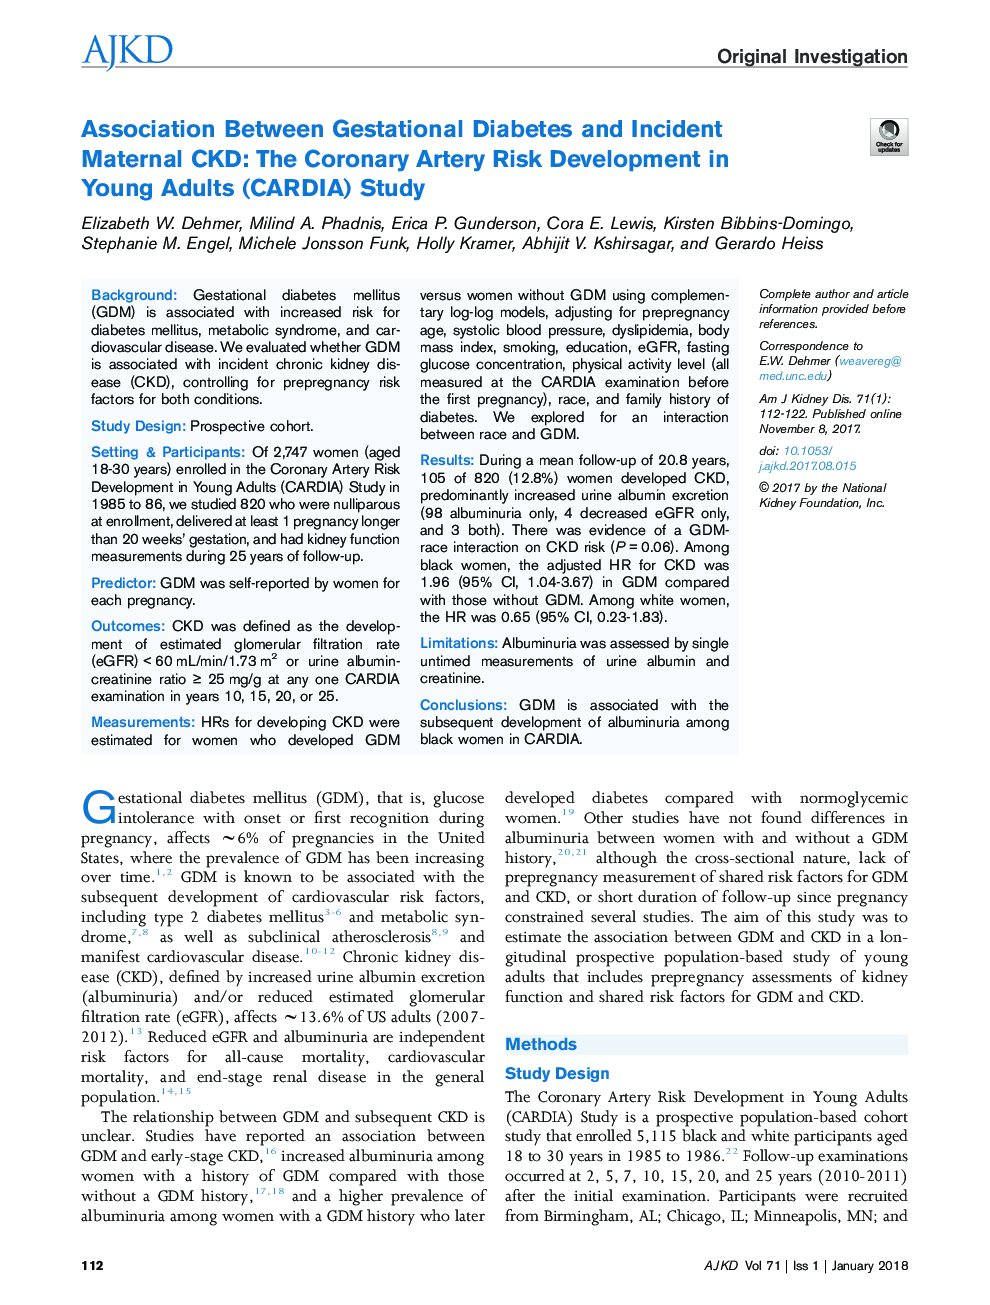 Association Between Gestational Diabetes and Incident Maternal CKD: The Coronary Artery Risk Development in Young Adults (CARDIA) Study